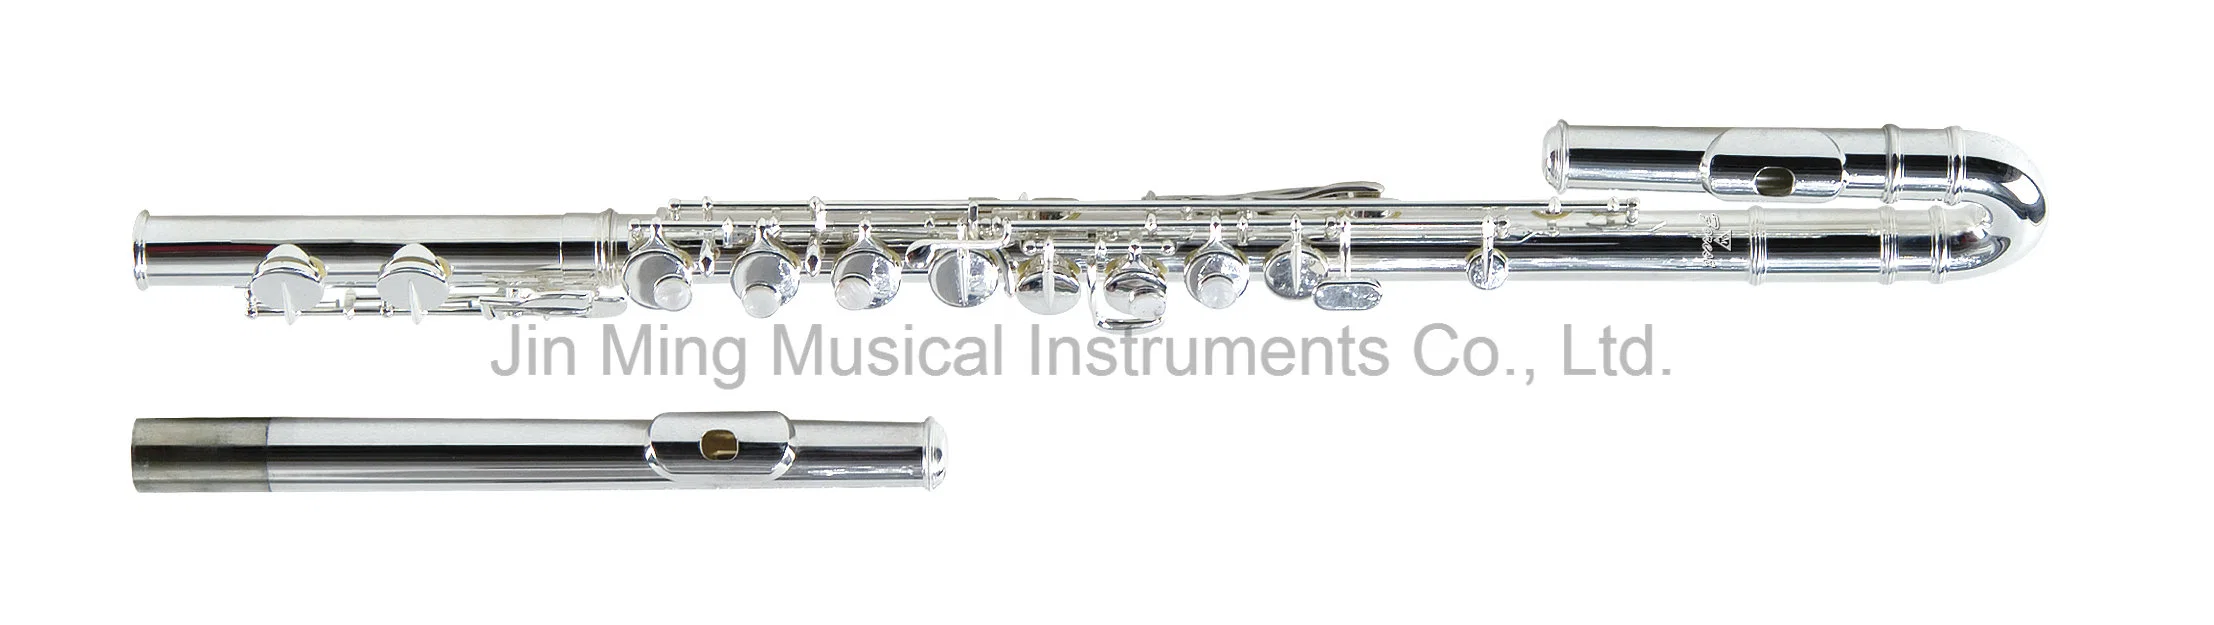 Good Quality Alto Flute Made in China Cheap Price Manufacturer